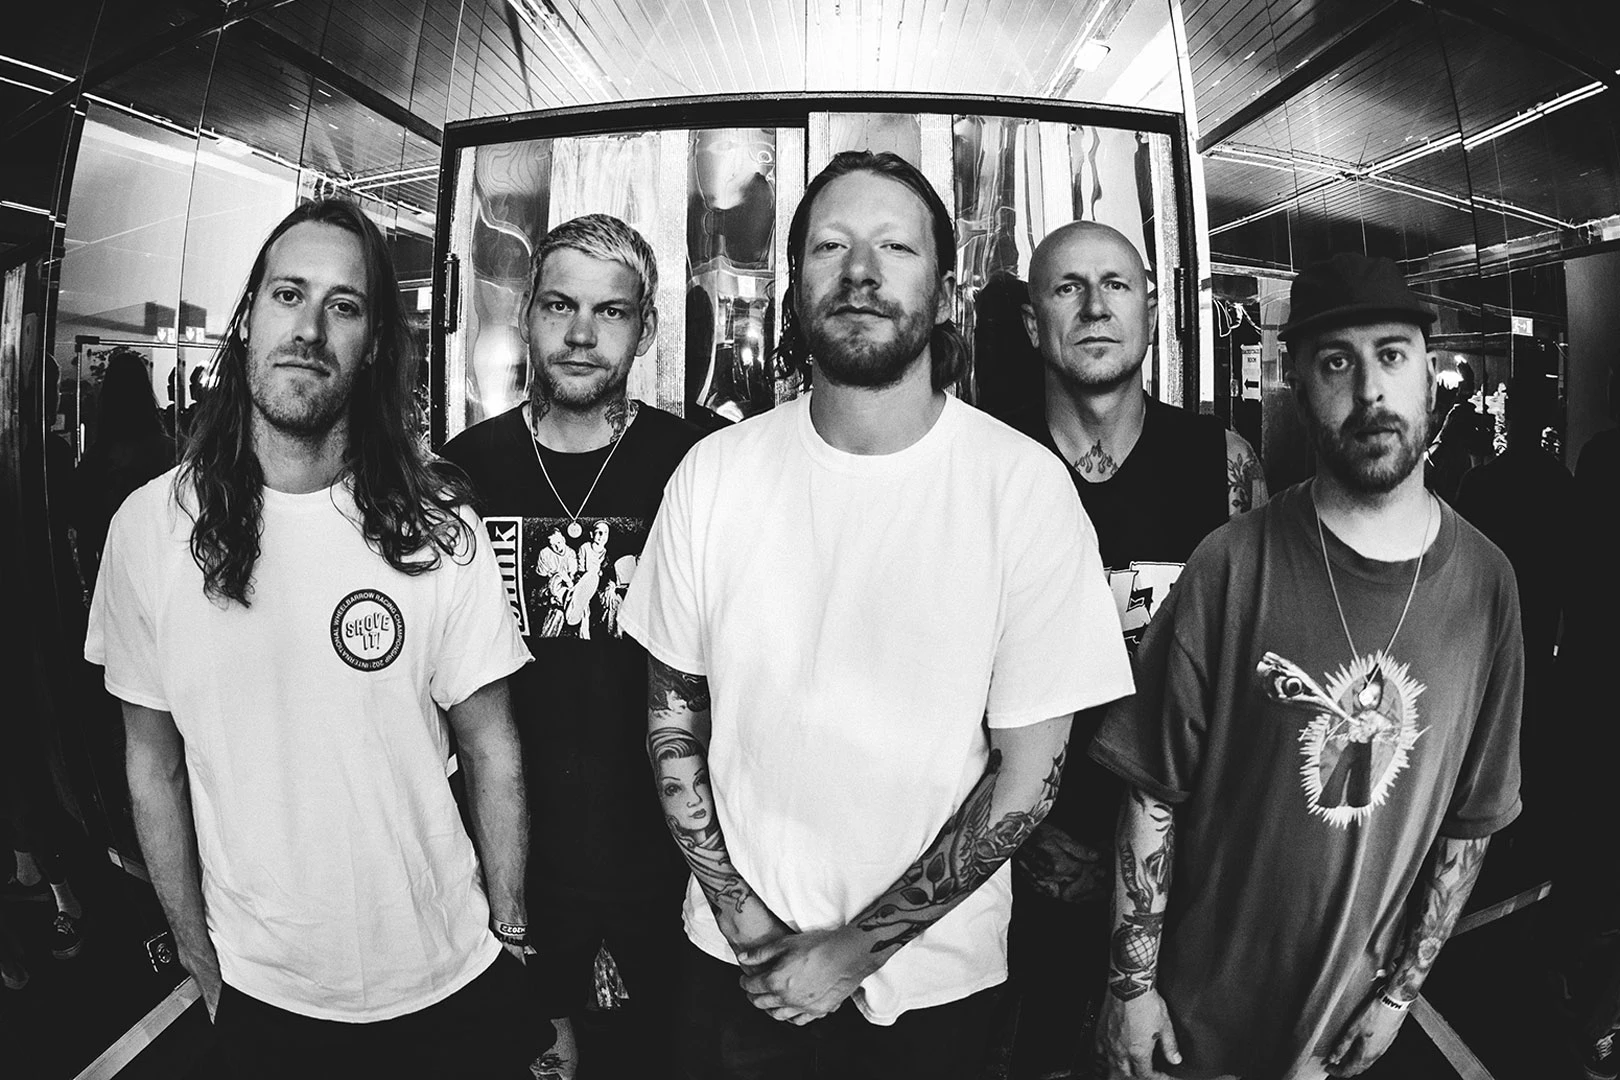 Comeback Kid Singer – ‘Trouble’ EP Is Band Taking Leaps of Faith